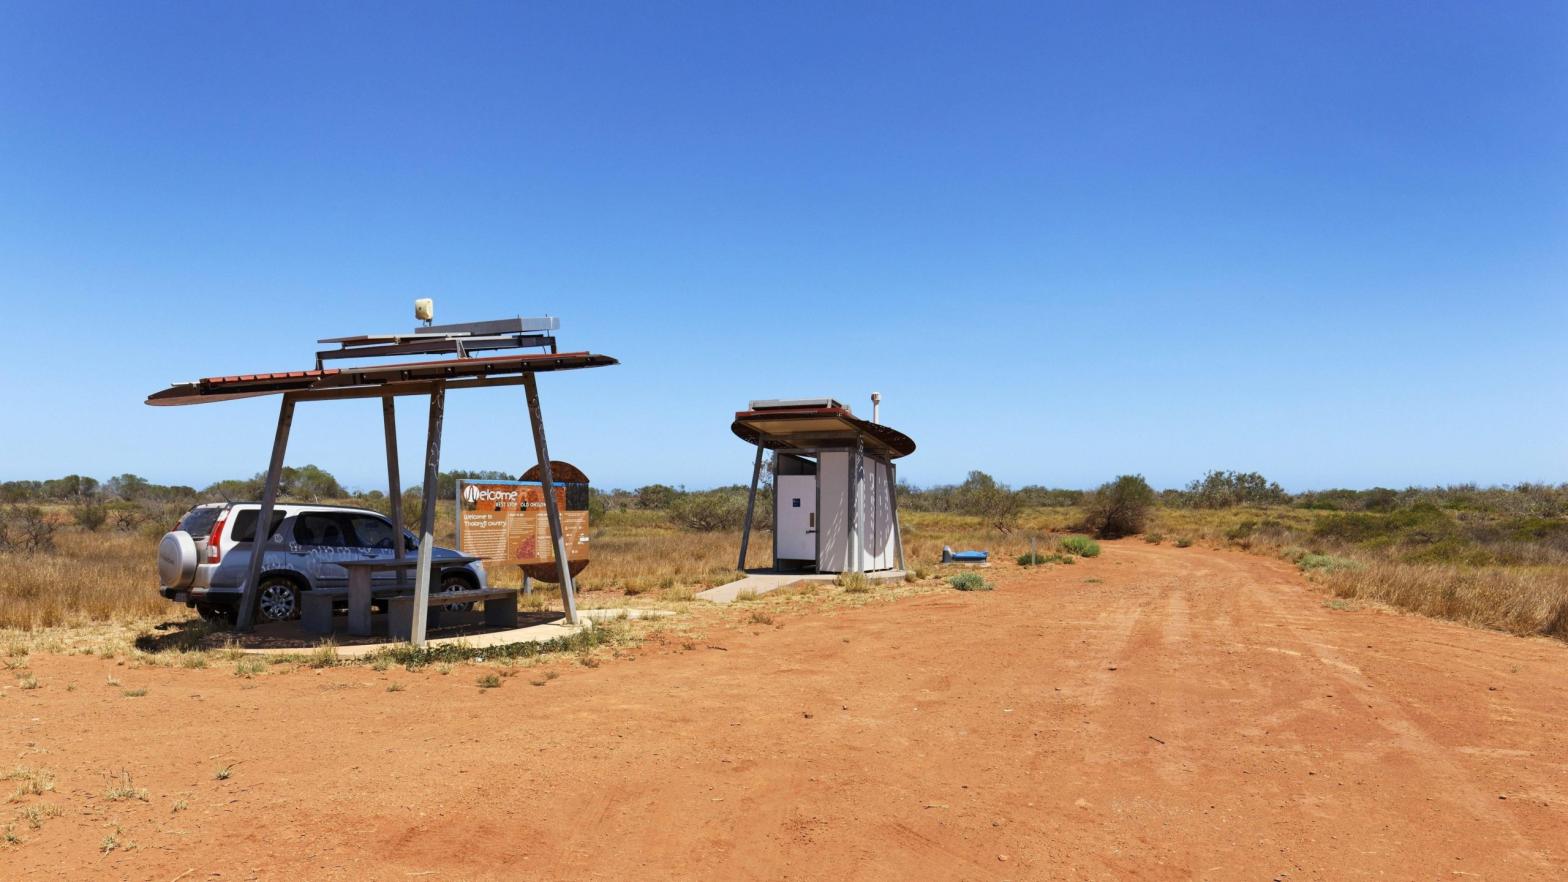 Tourists day shelter at the old historical Onslow town site, Onslow, Pilbara, Western Australia. (Photo: Paul Mayall/DPA, AP)